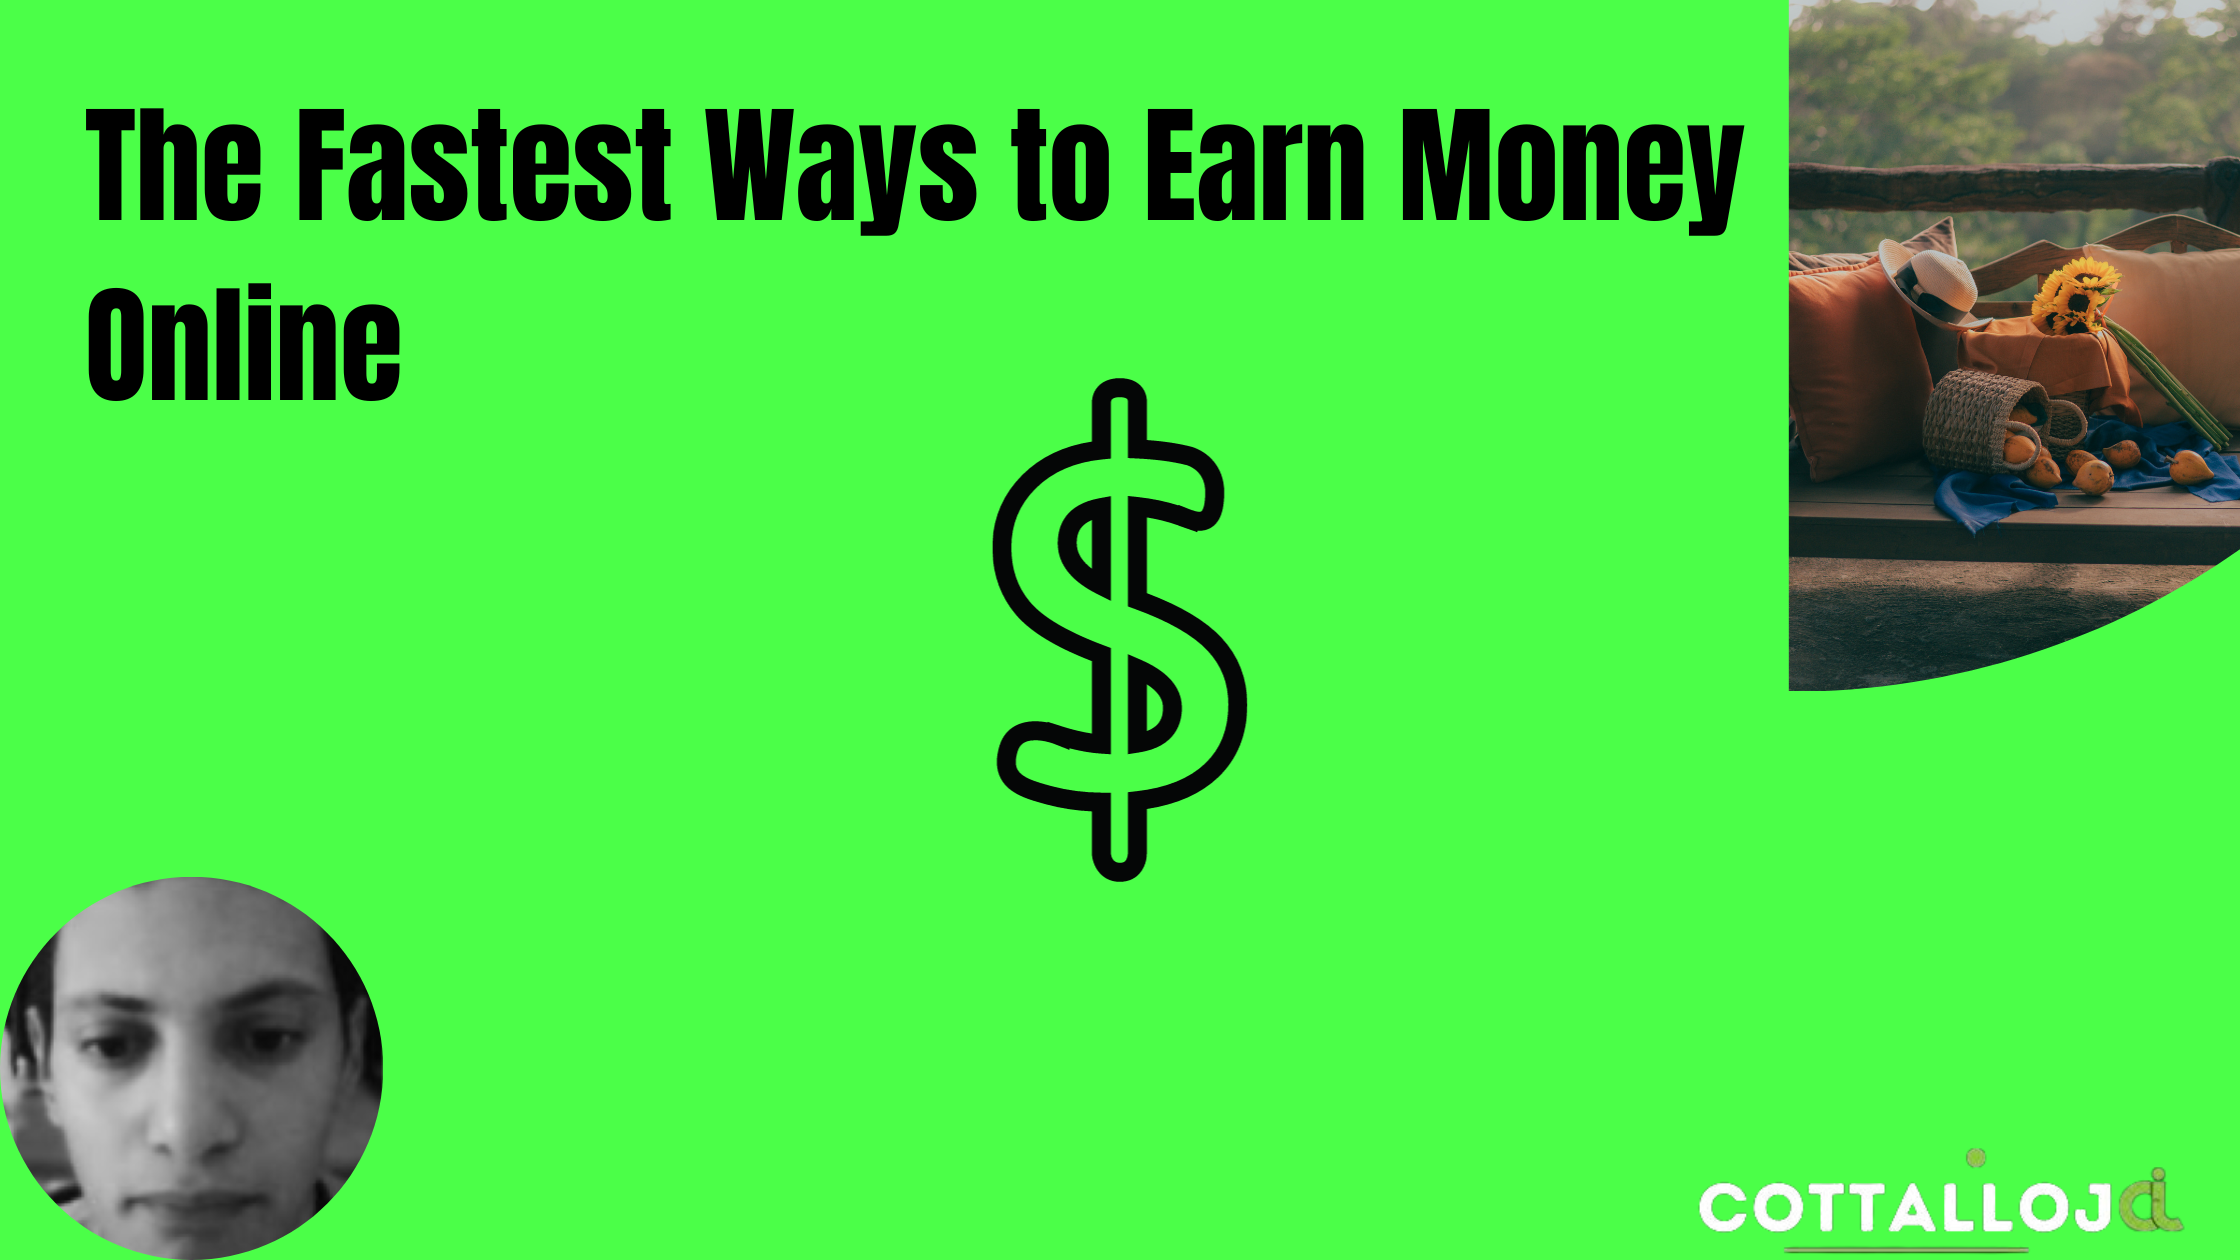 The Fastest Ways to Earn Money Online